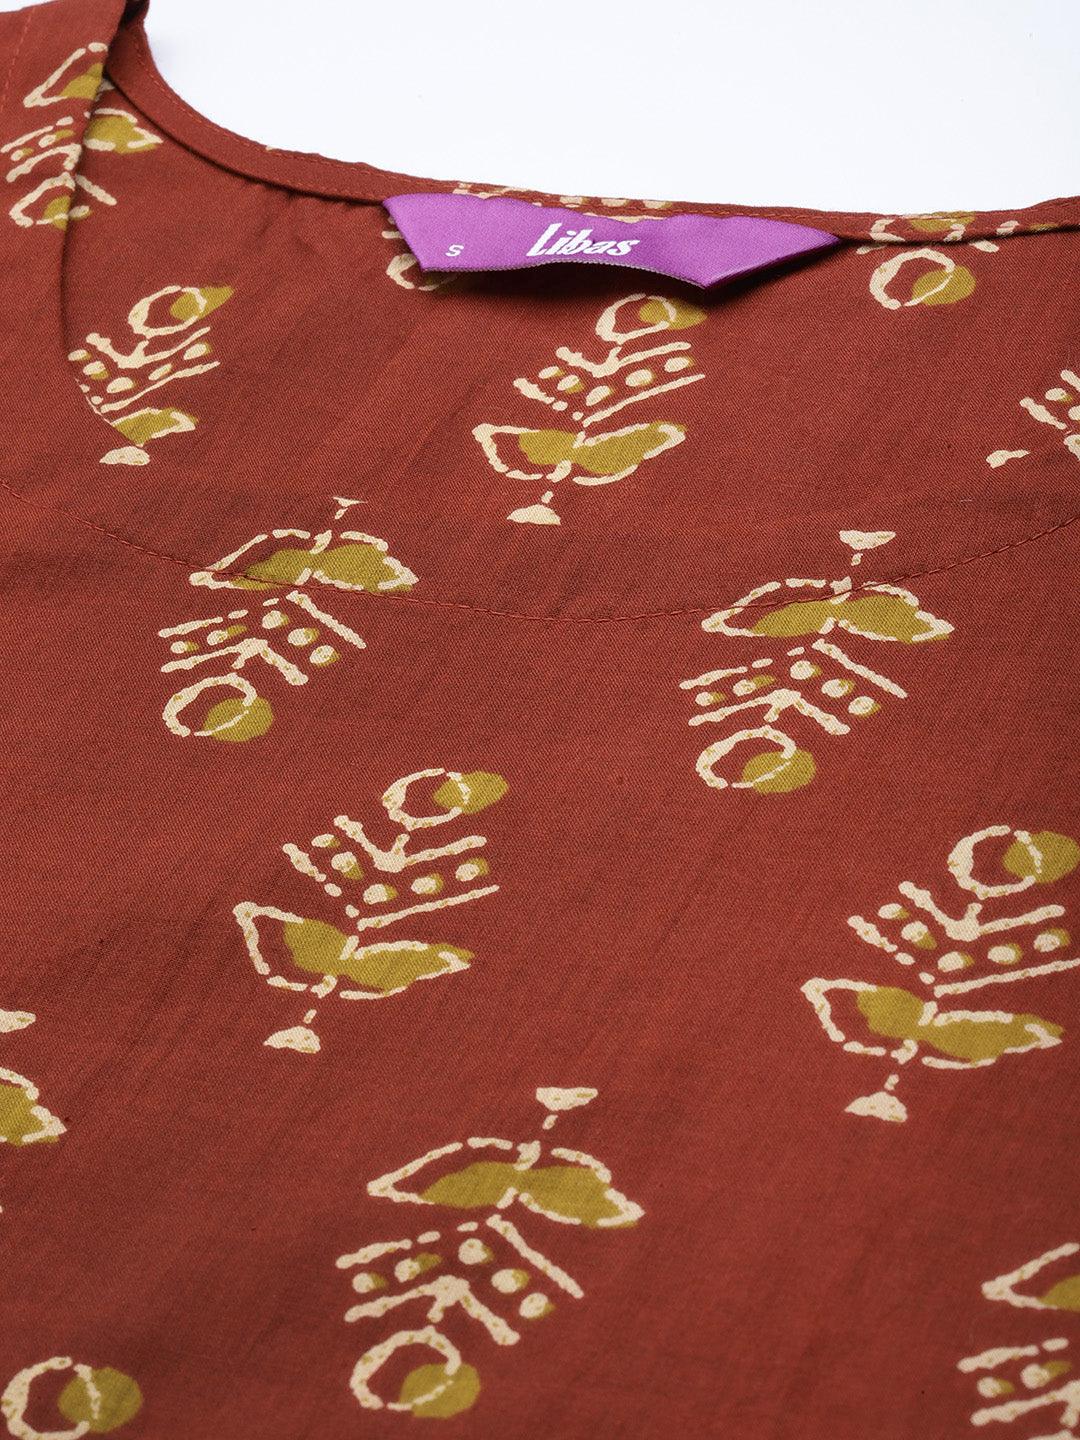 Rust Printed Cotton Straight Kurta With Trousers